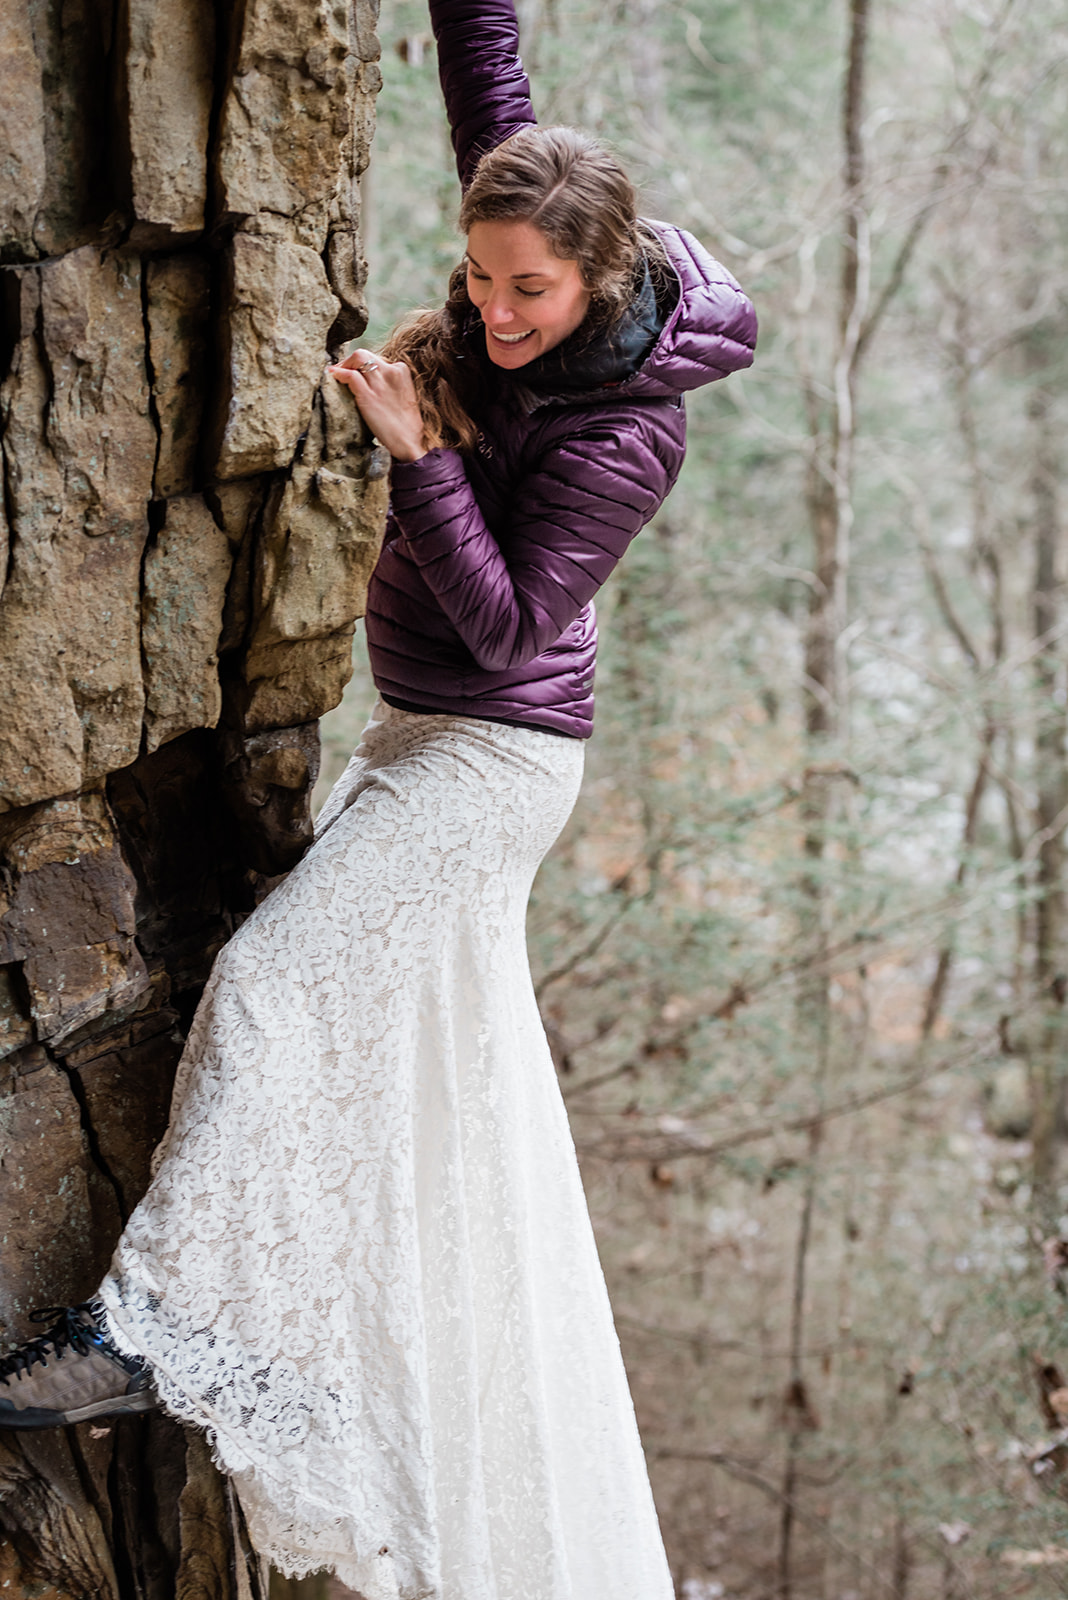 This is a picture of a bride in her wedding dress rock climbing.